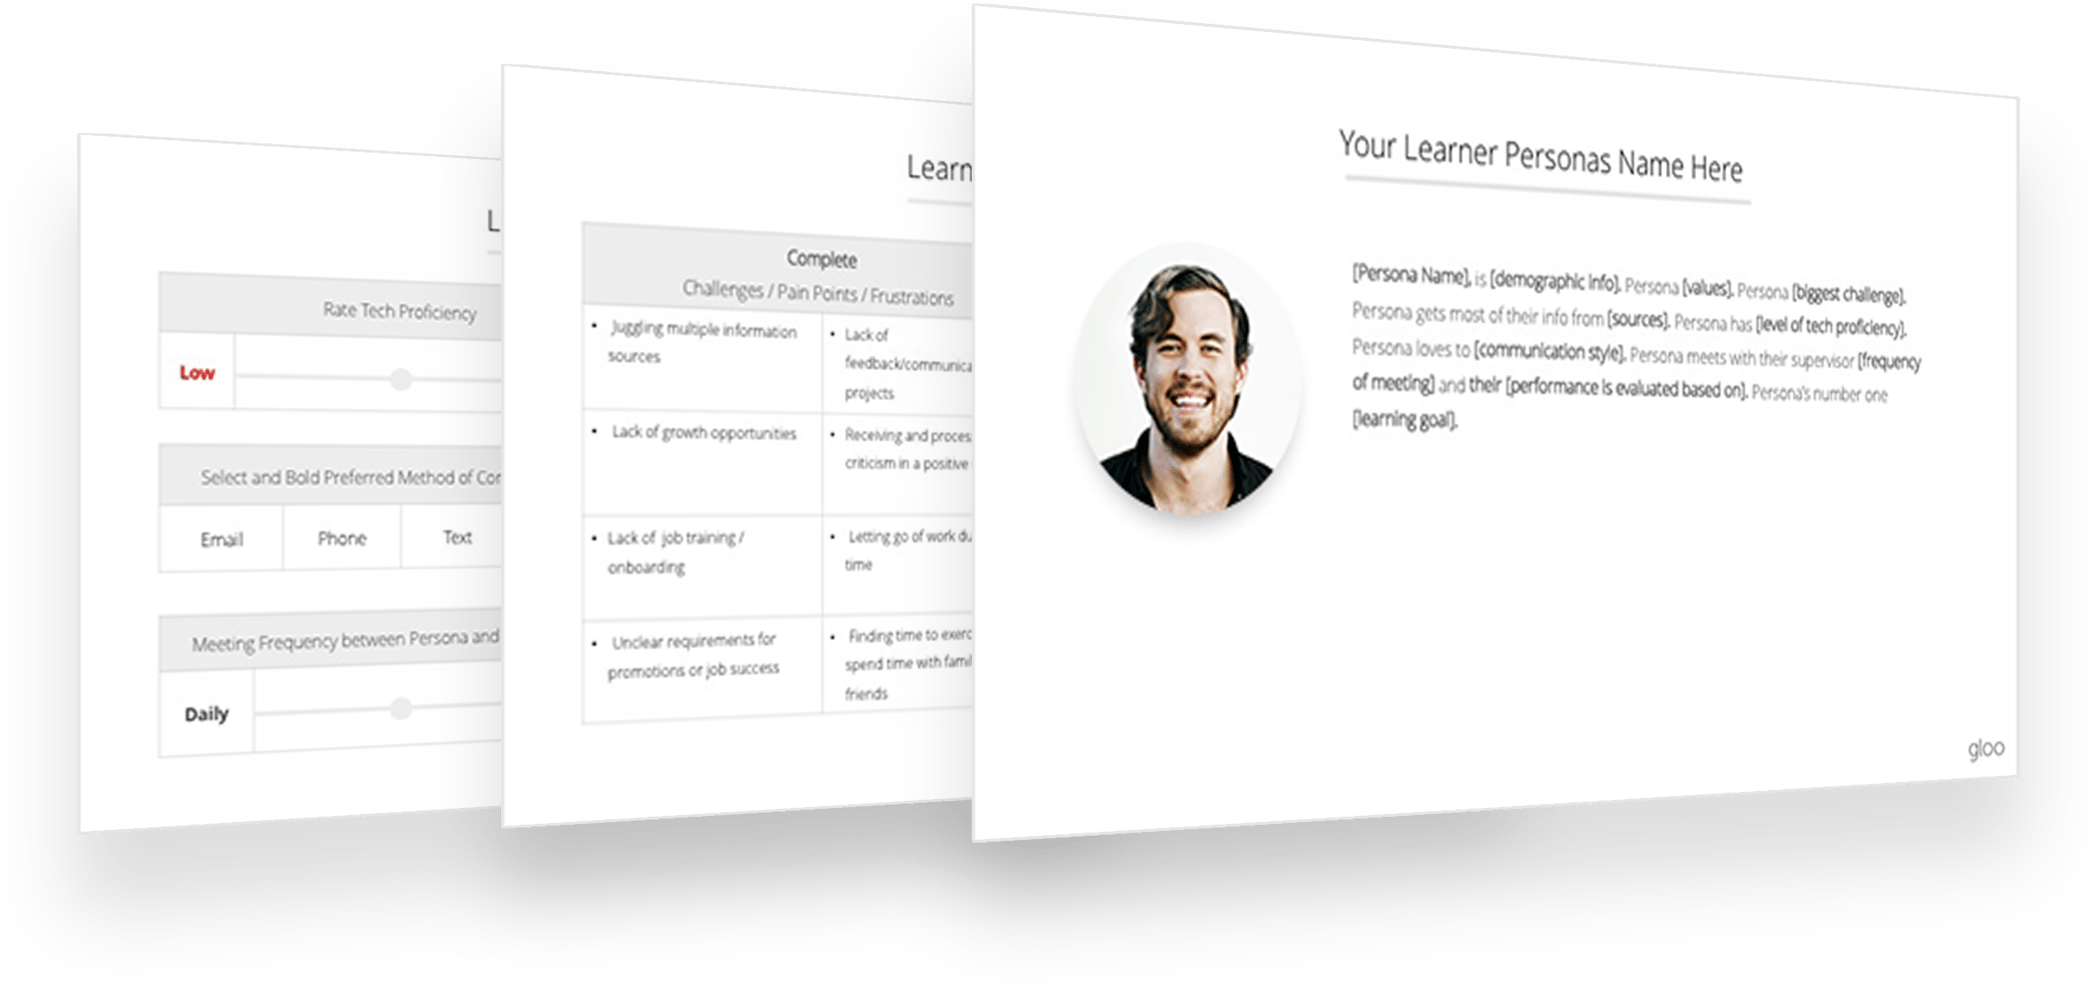 Use Learner Persona Templates to Tailor Your Development Strategy